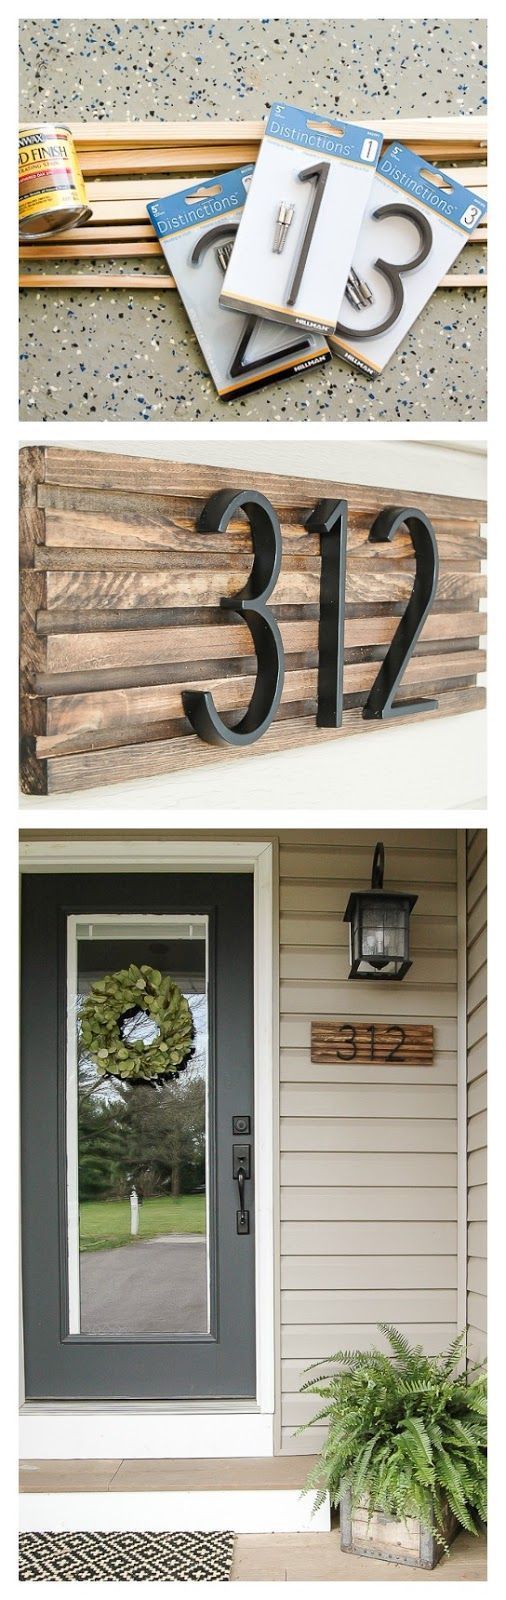 How to make a modern house number sign from square dowels. www.littlehouseof...